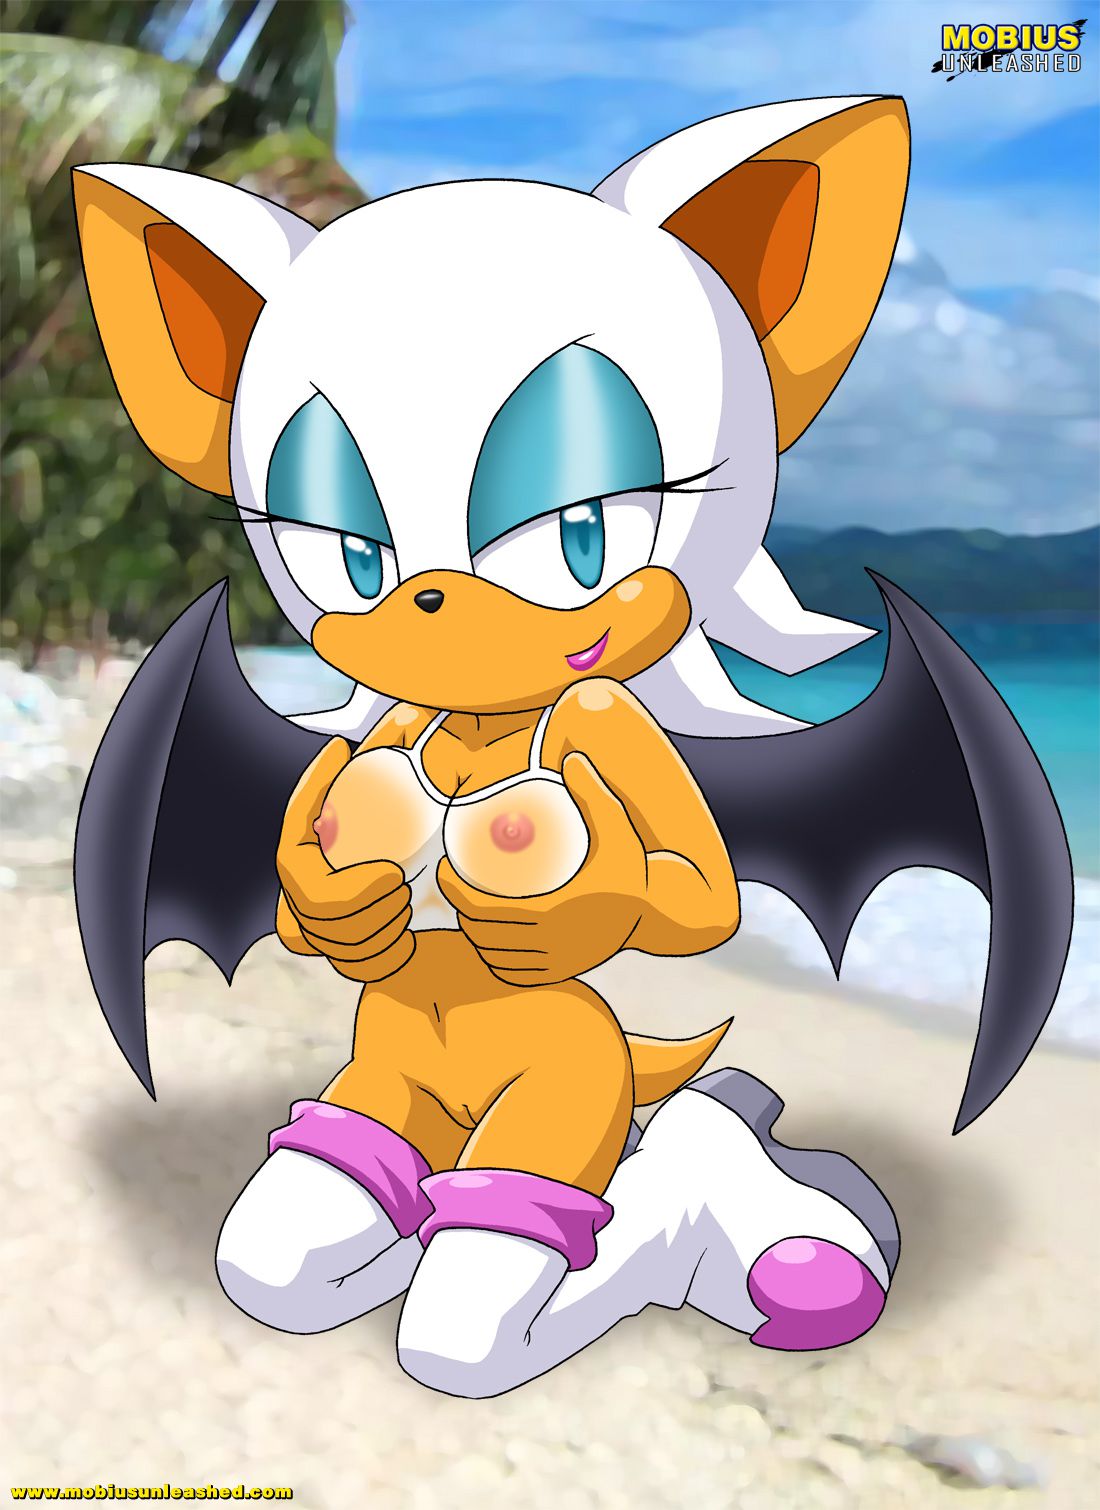 Mobius Unleashed: Rouge the Bat 92